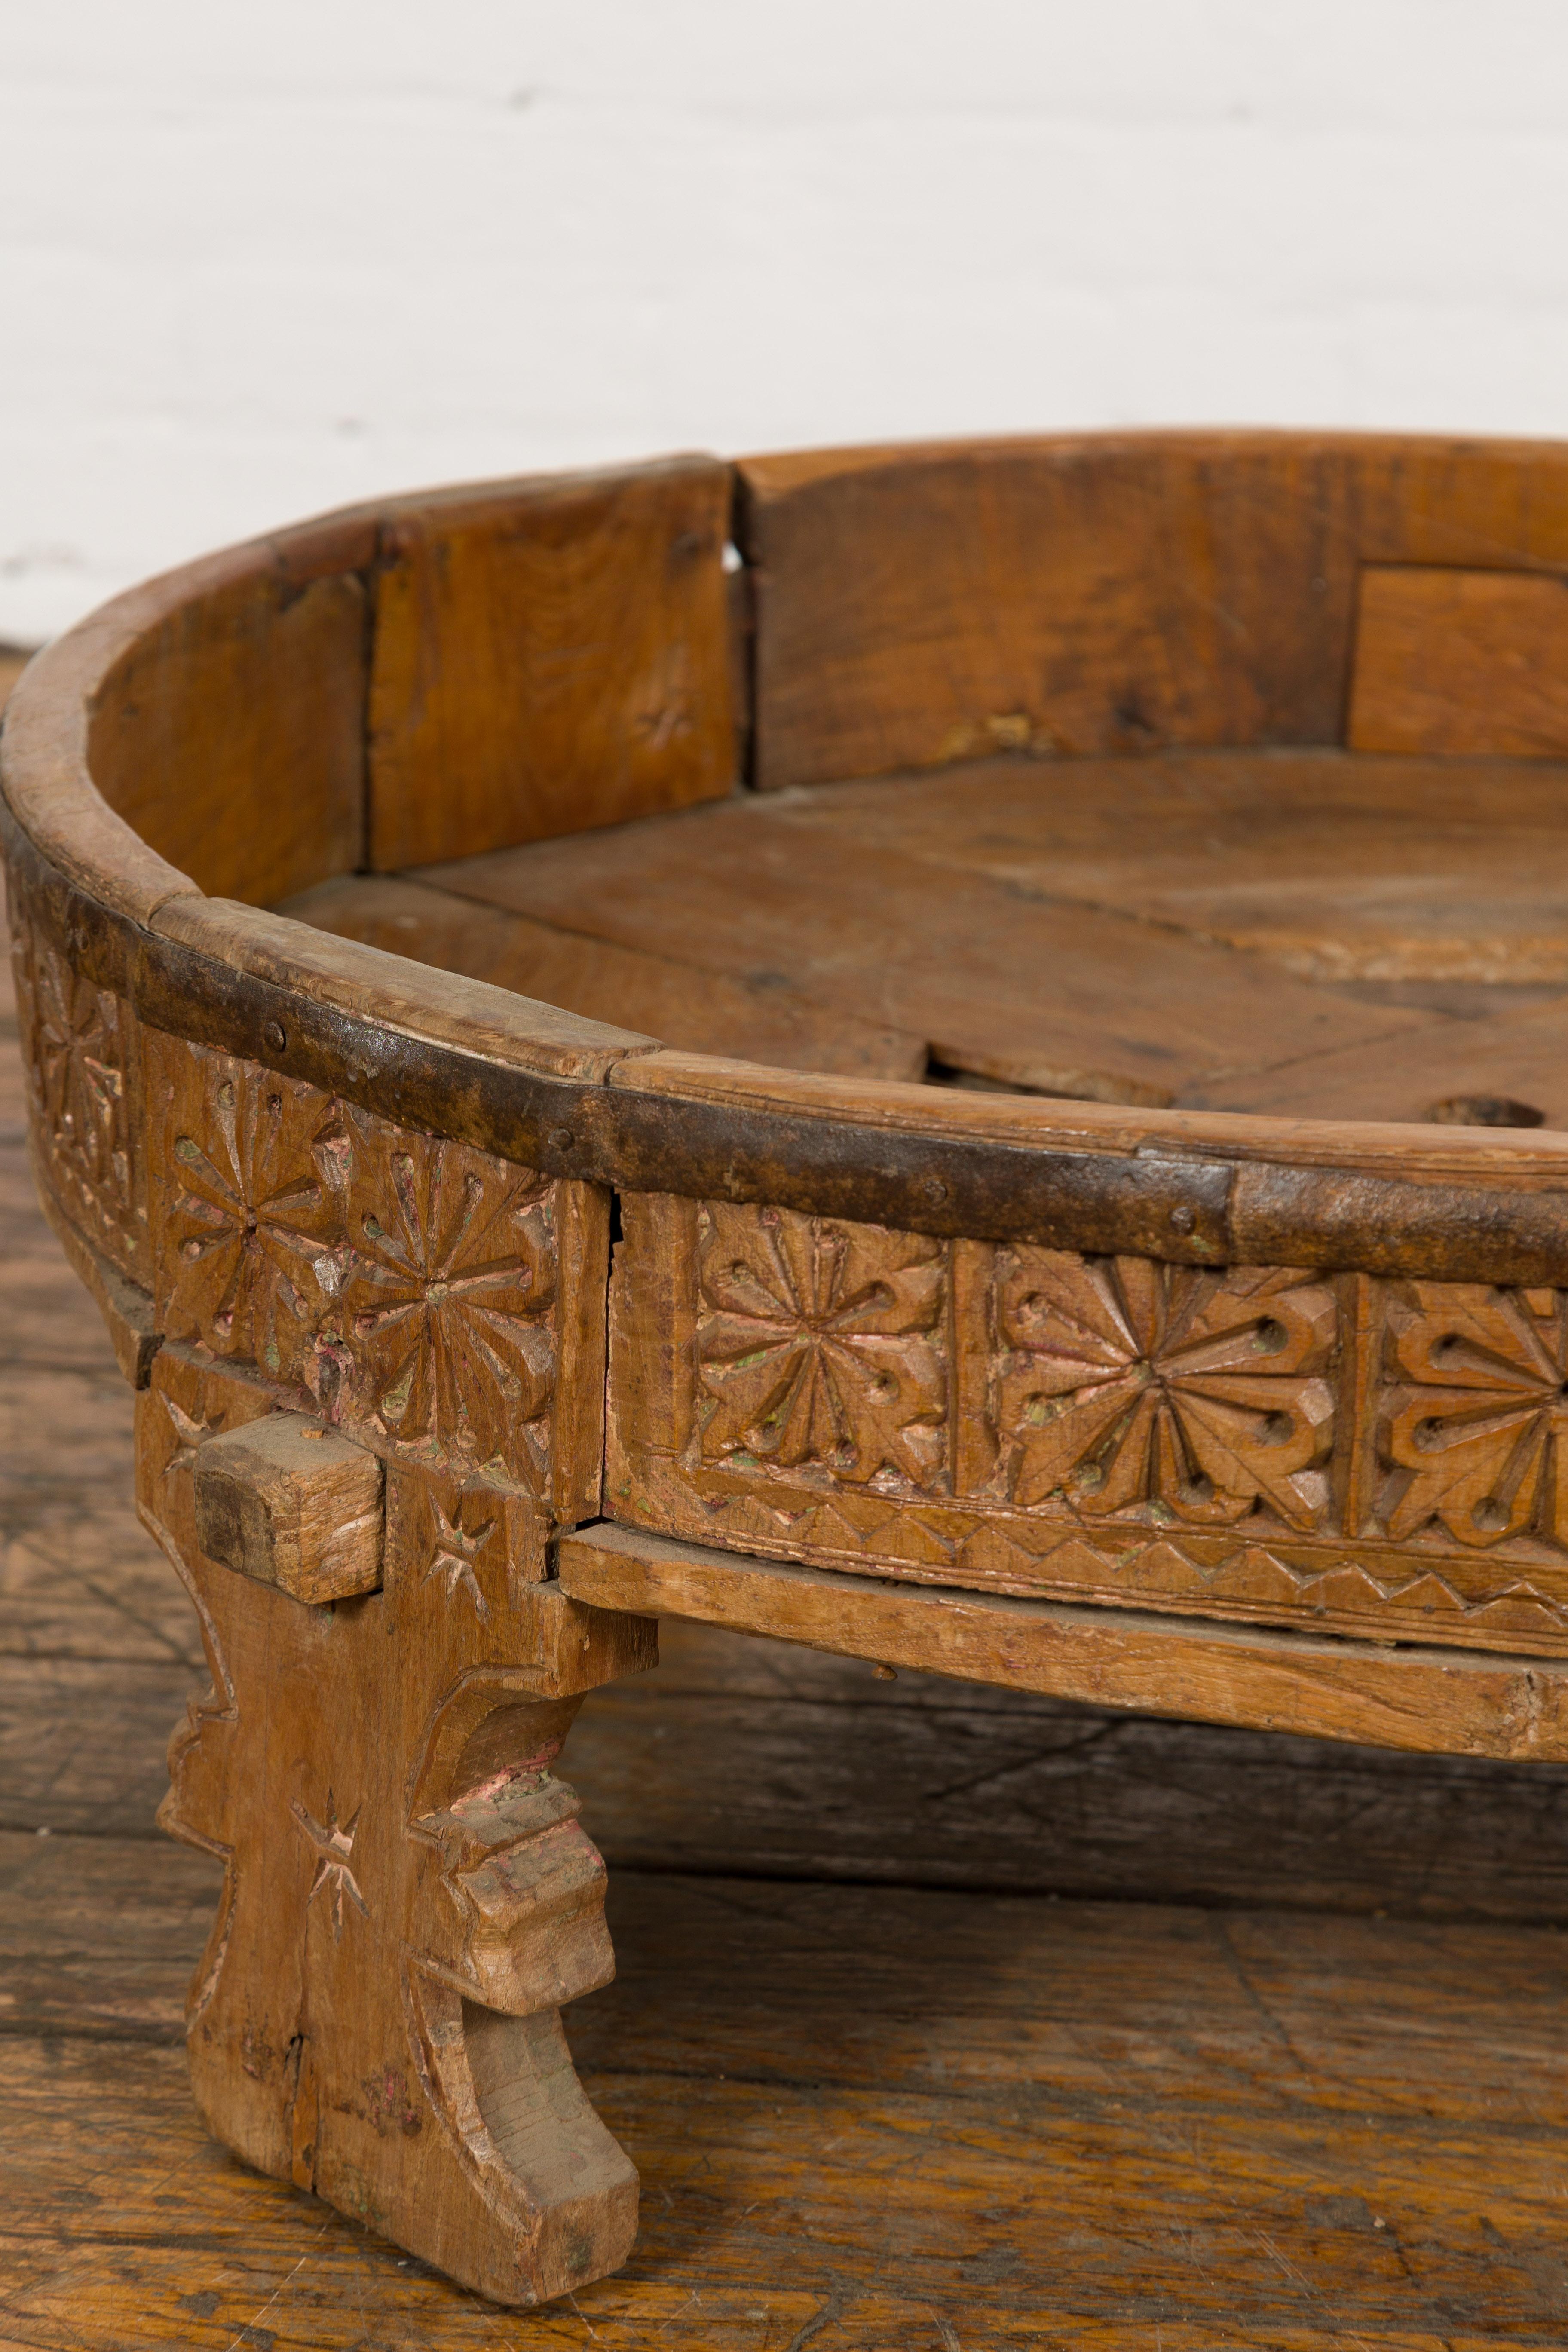 Indian Tribal 1920s Teak Chakki Grinding Table with Geometric Hand-Carved Motifs For Sale 2